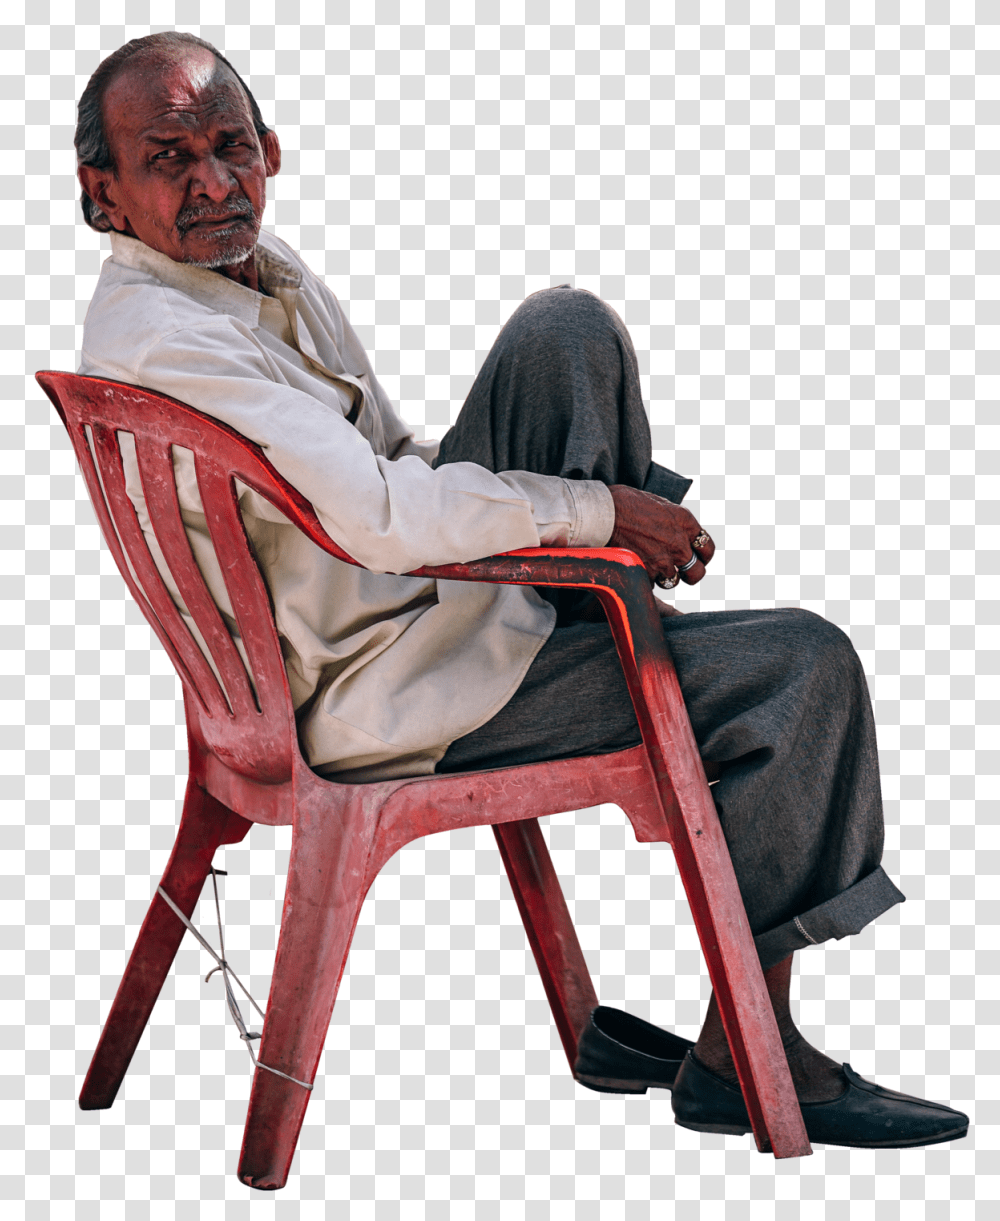 Old Man Sitting Onabroken Chair Relaxed Sitting People Chair, Furniture, Person, Human, Clothing Transparent Png